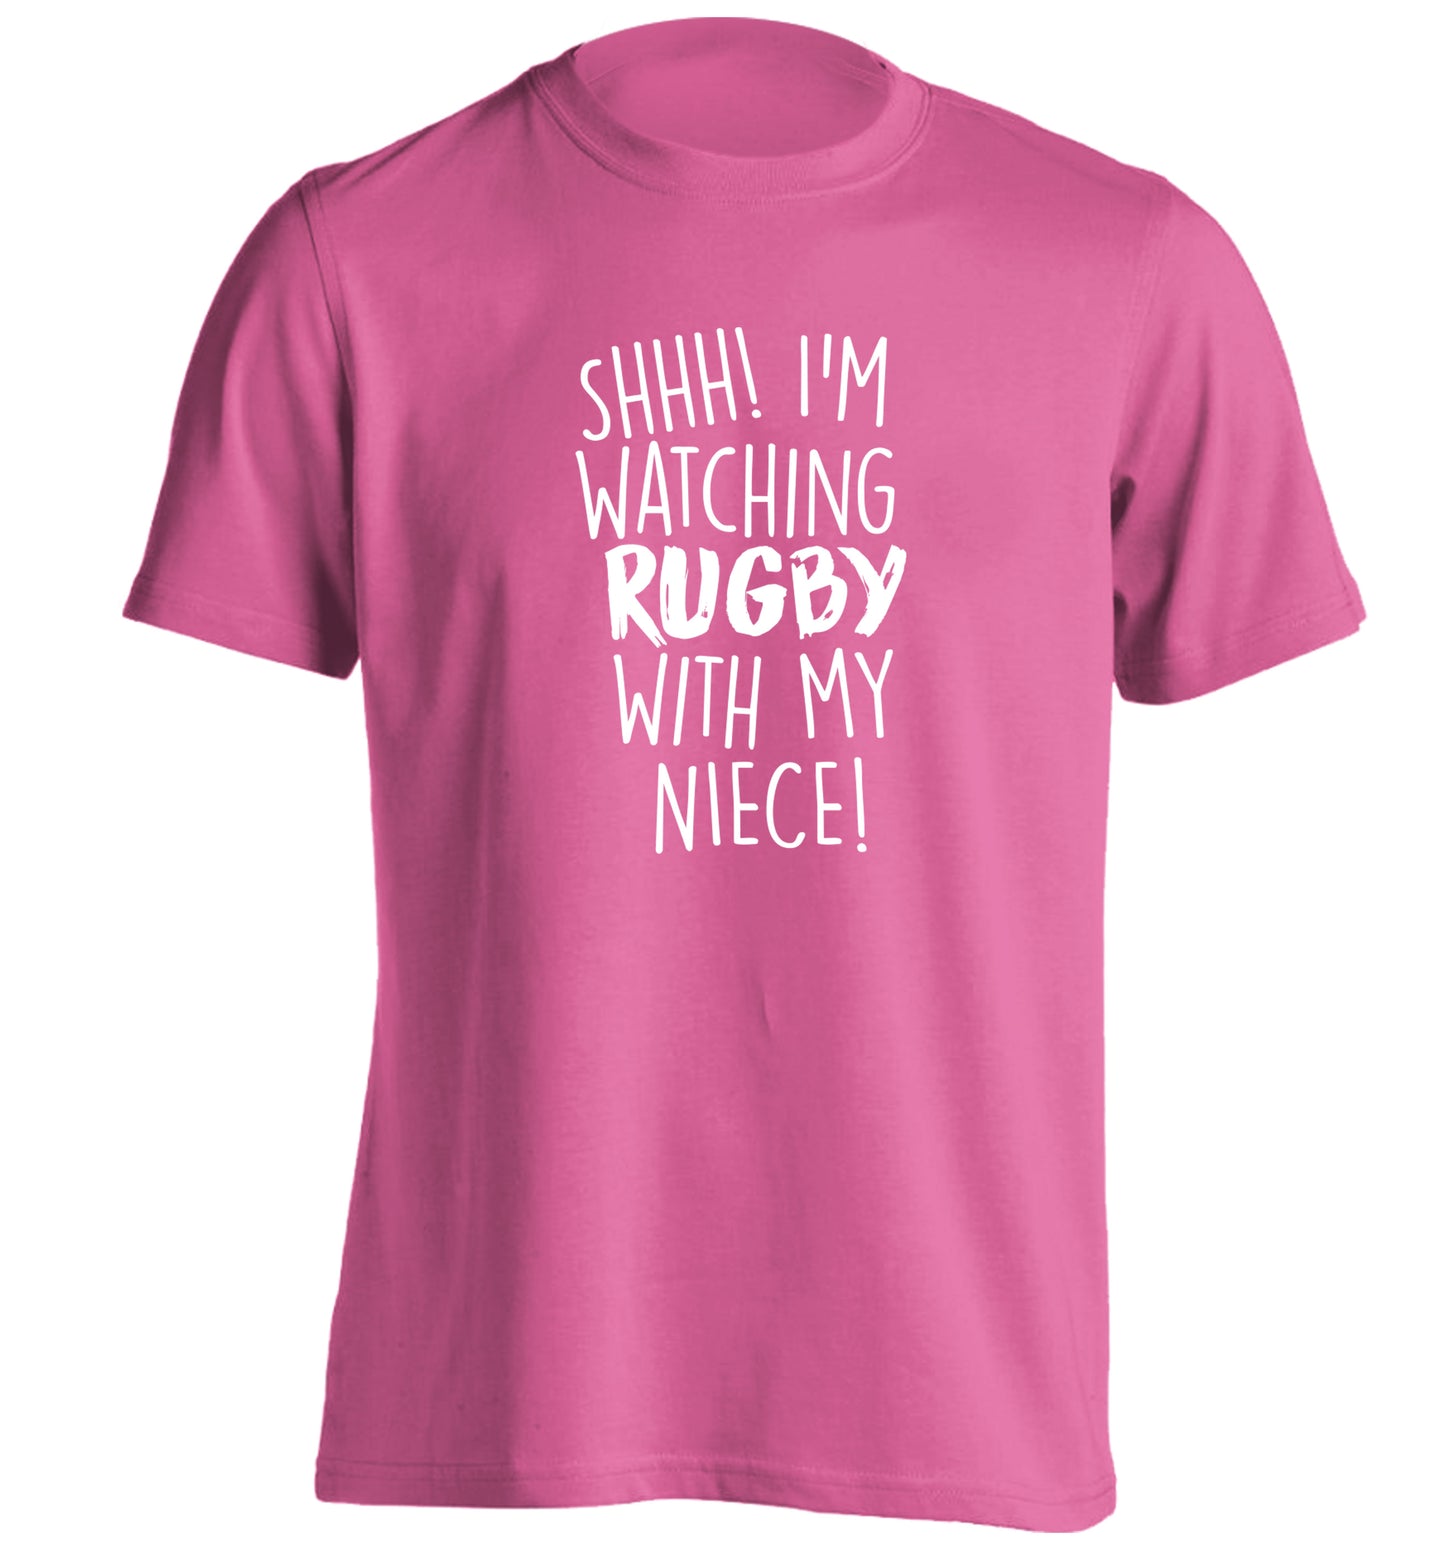 Shh.. I'm watching rugby with my niece adults unisex pink Tshirt 2XL